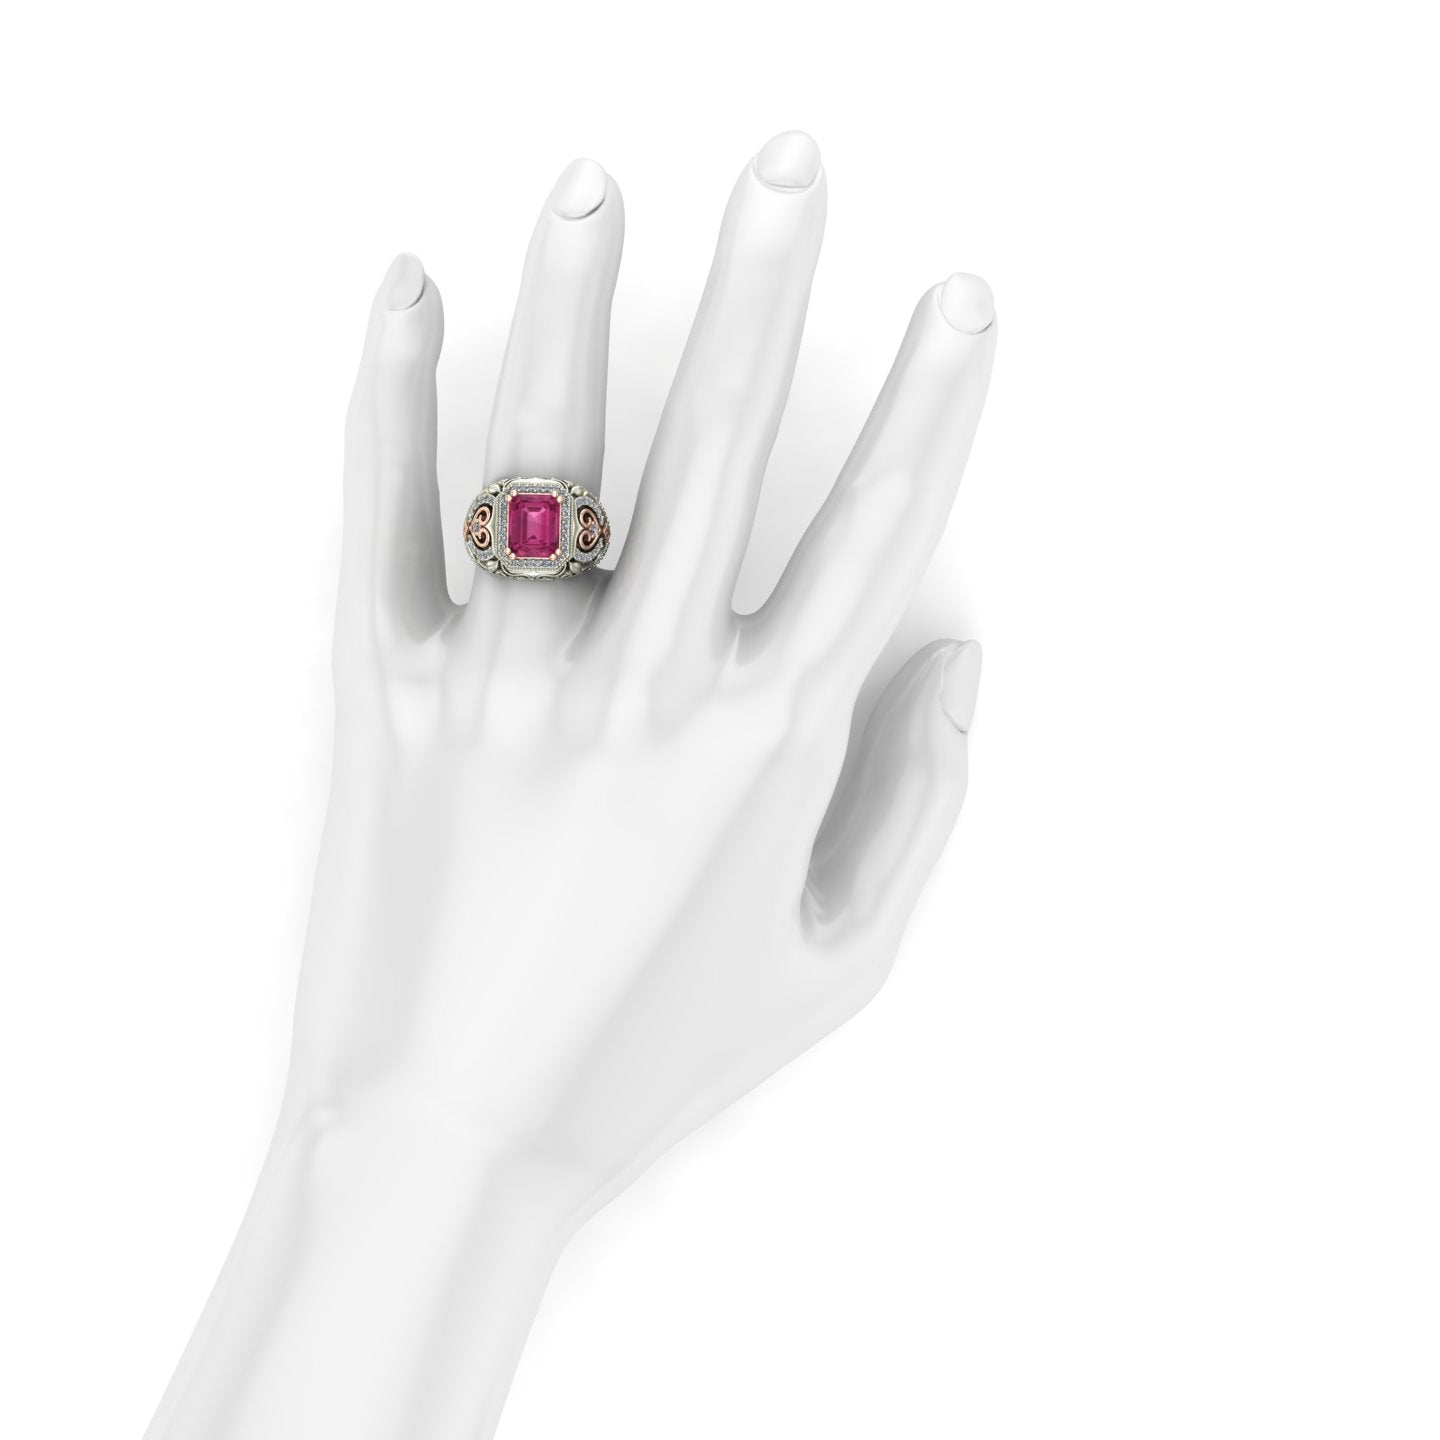 emerald cut pink tourmaline and diamond two tone dome ring in 14k rose and white gold - Charles Babb Designs - on hand